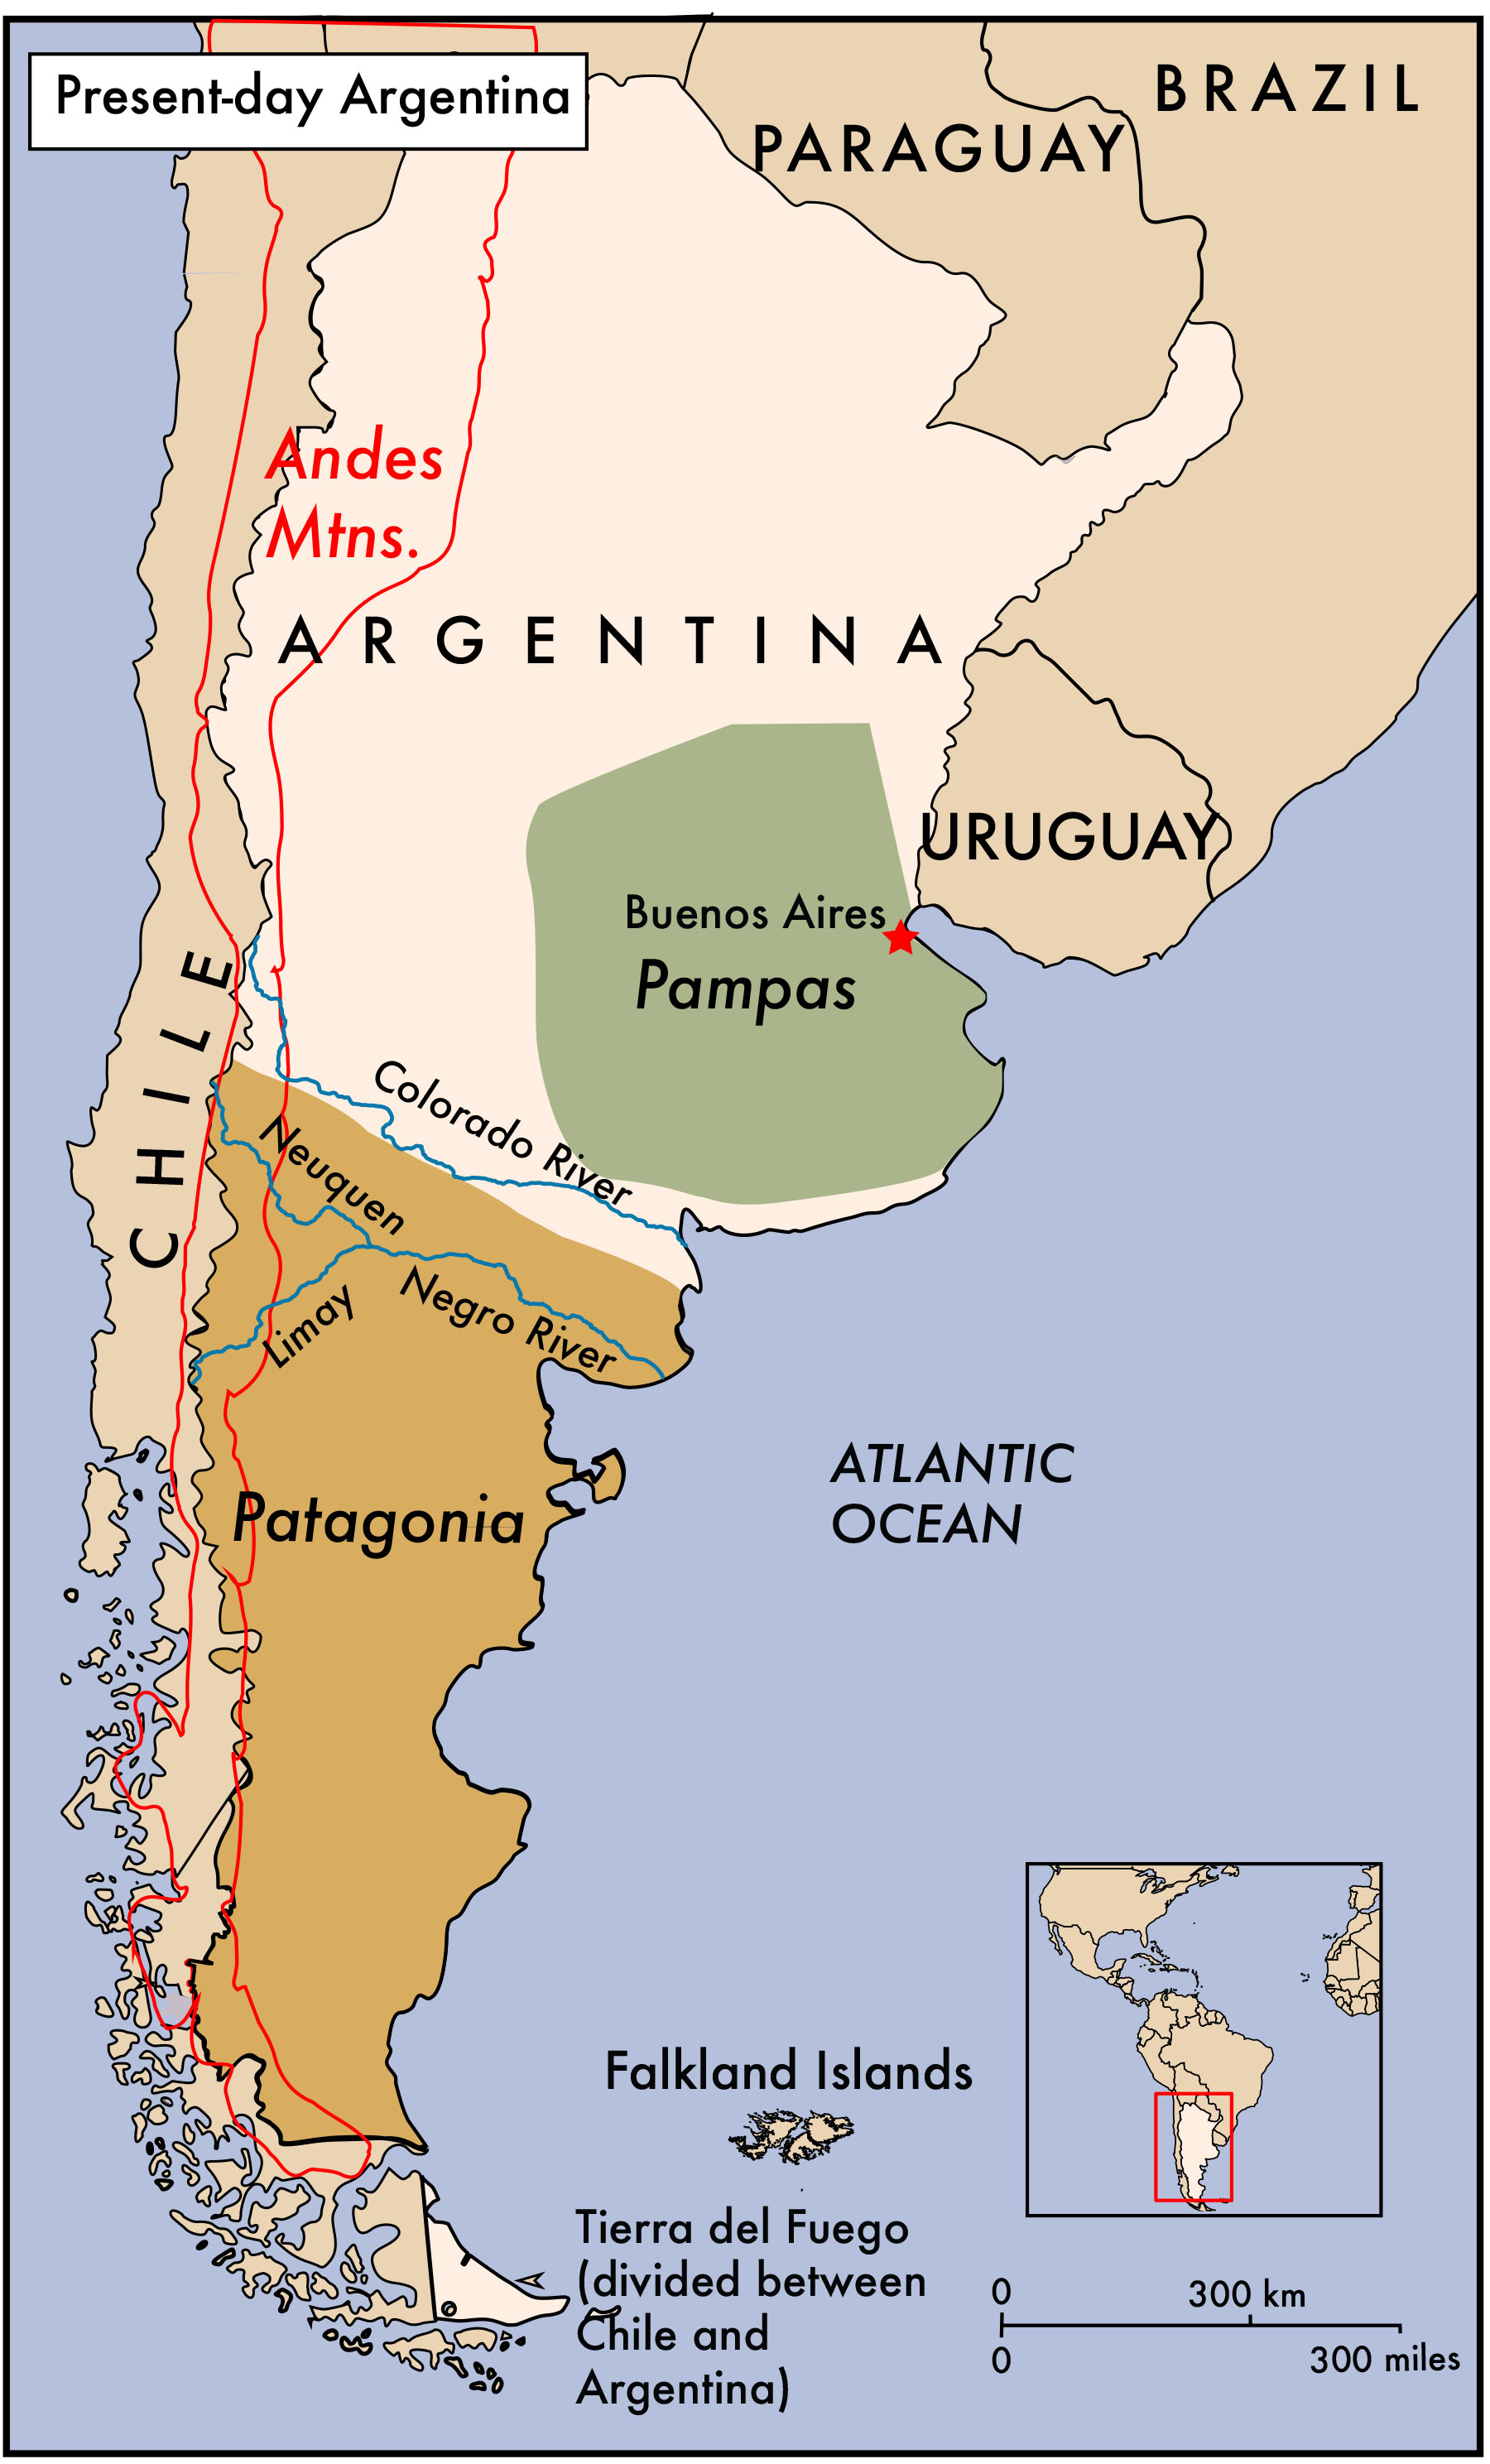 Map of Argentina showing the region of Patagonia in the southern half and the Pampas region around Buenos Aires.